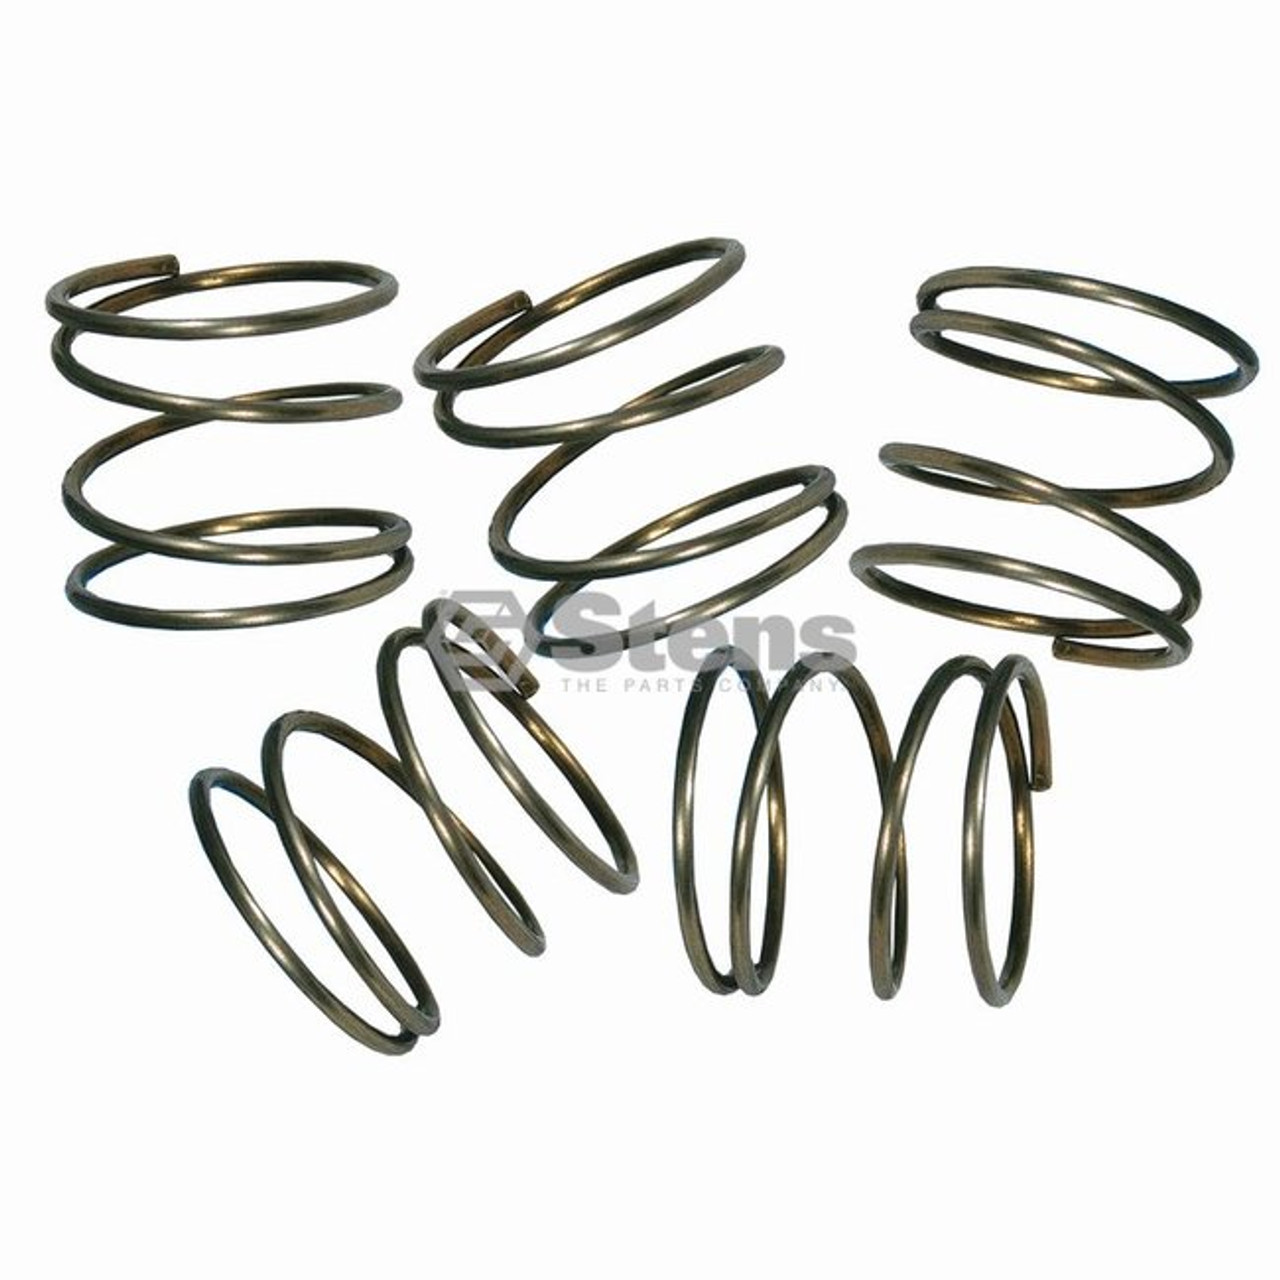 Bump Feed Head Spring for Echo GT2000, 215405 Shop pack of 5 springs